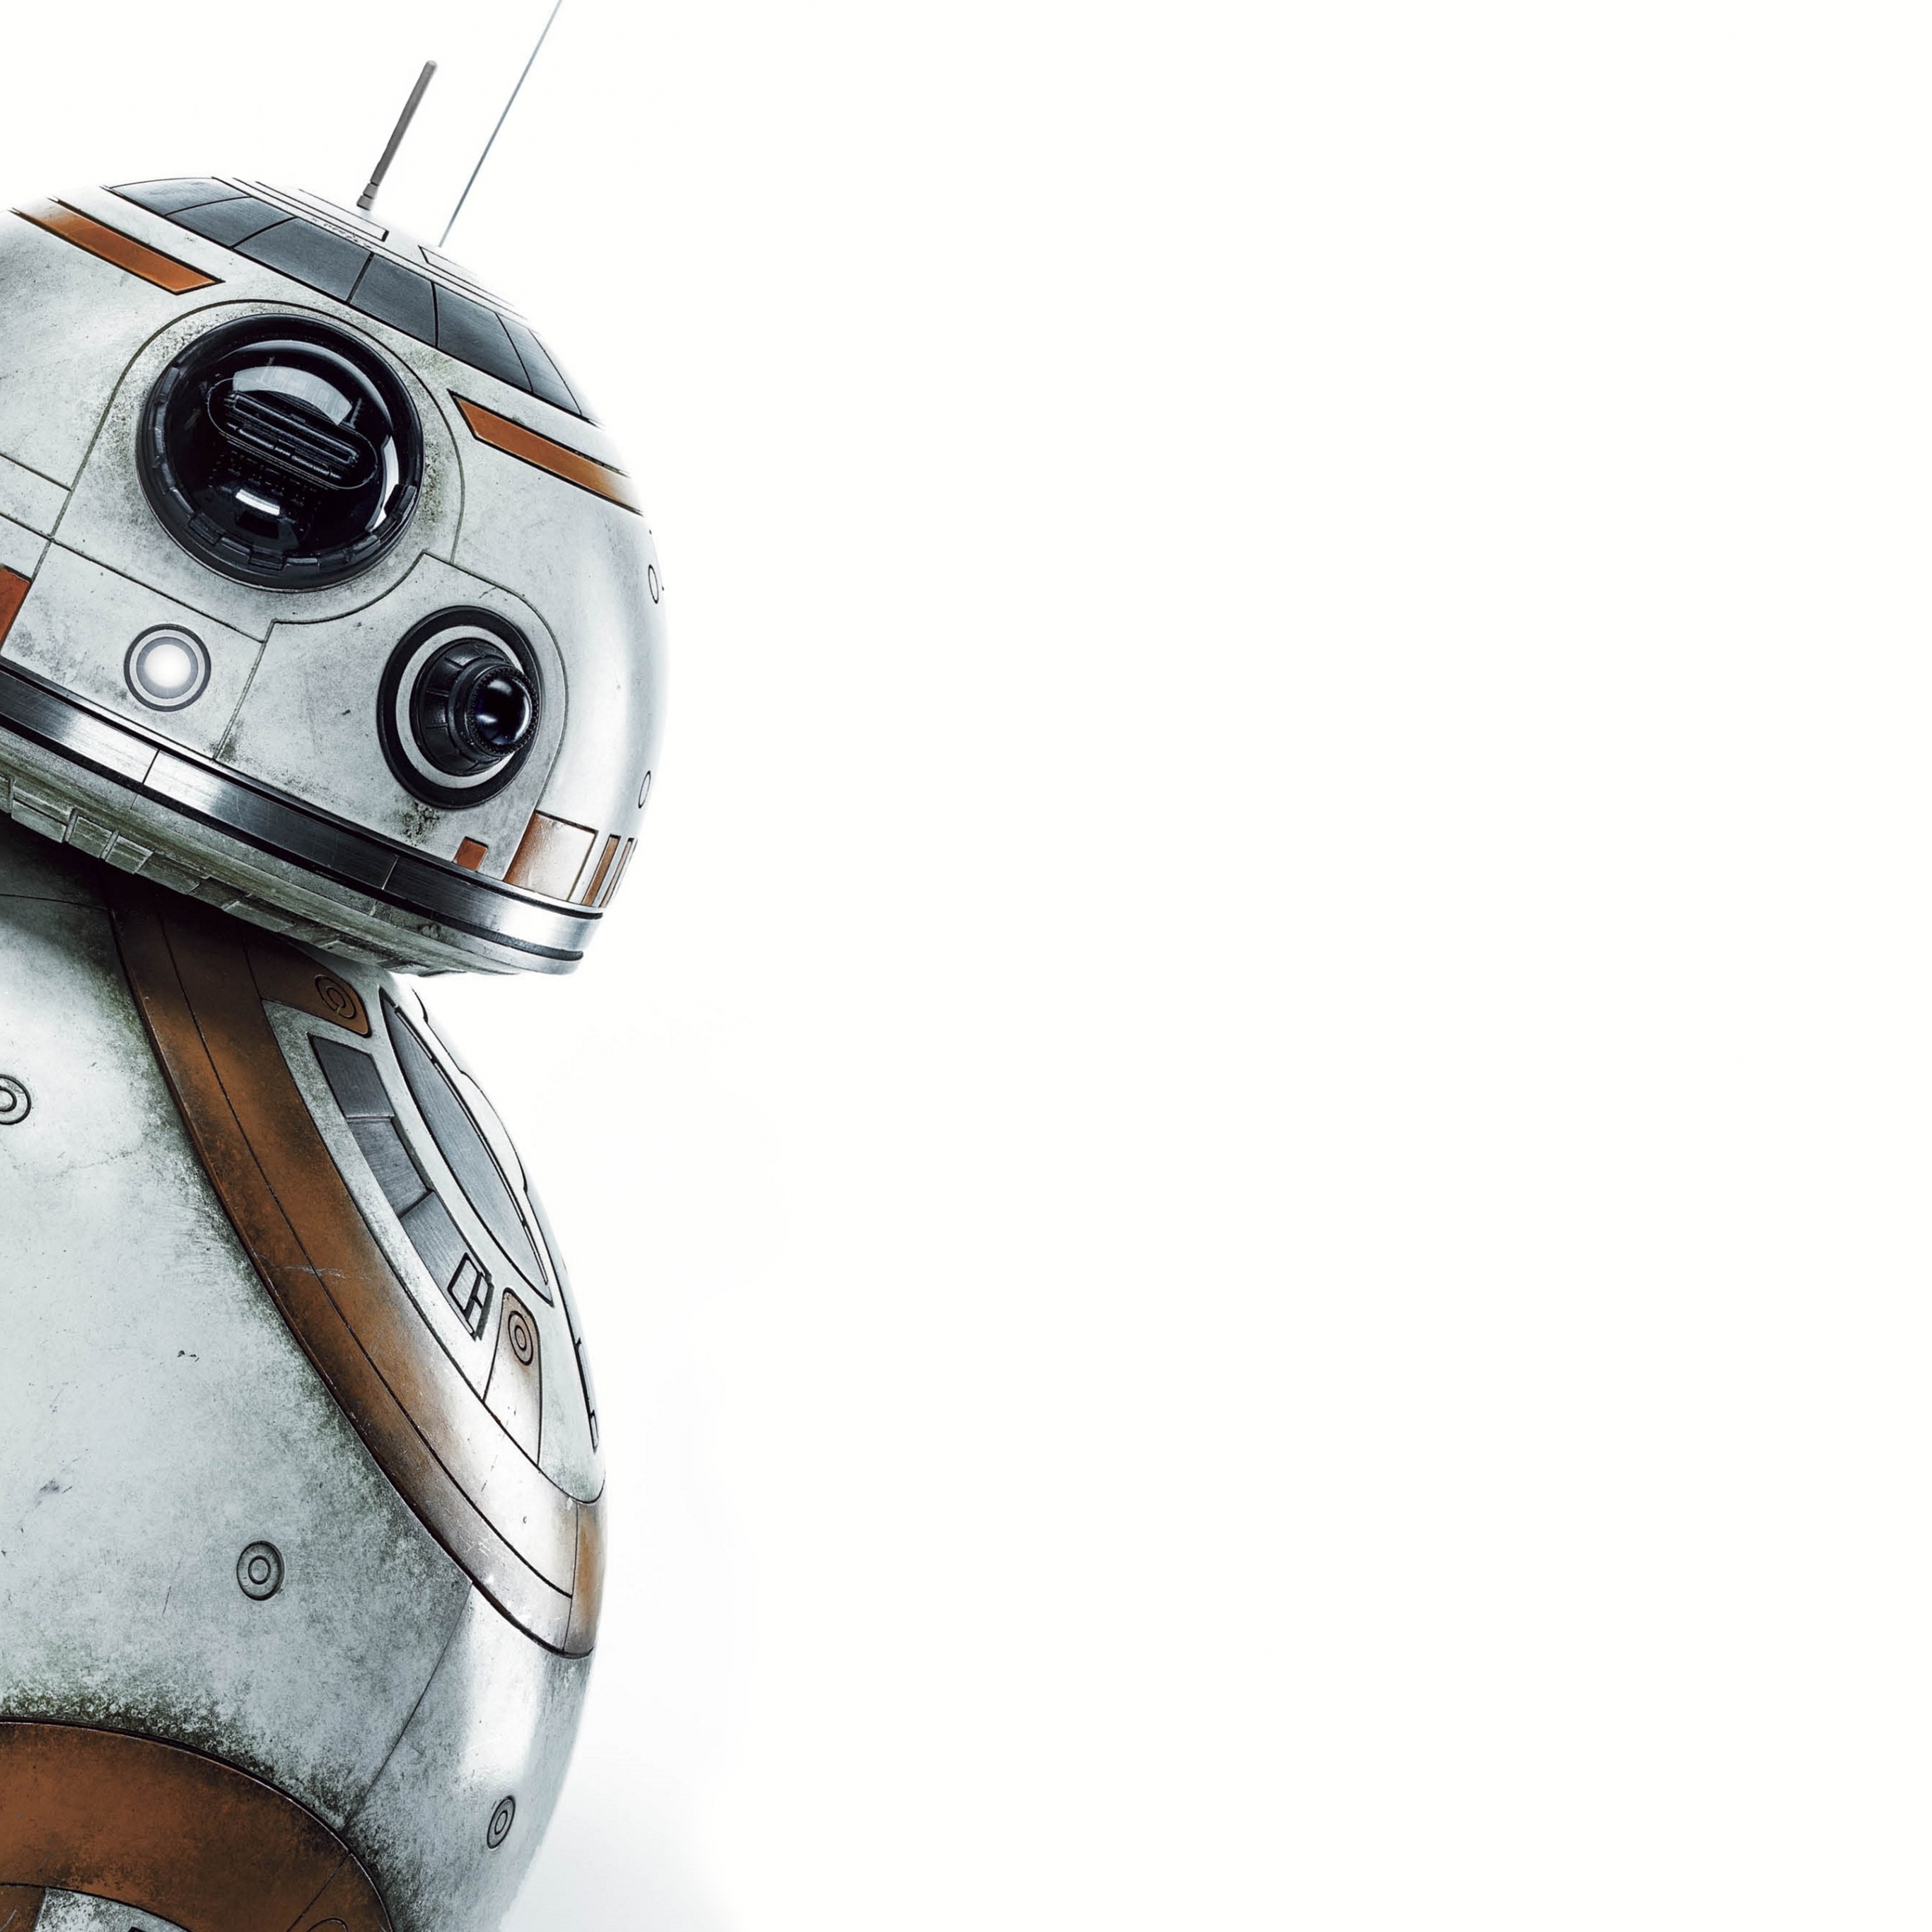 Free Images  Bb 8